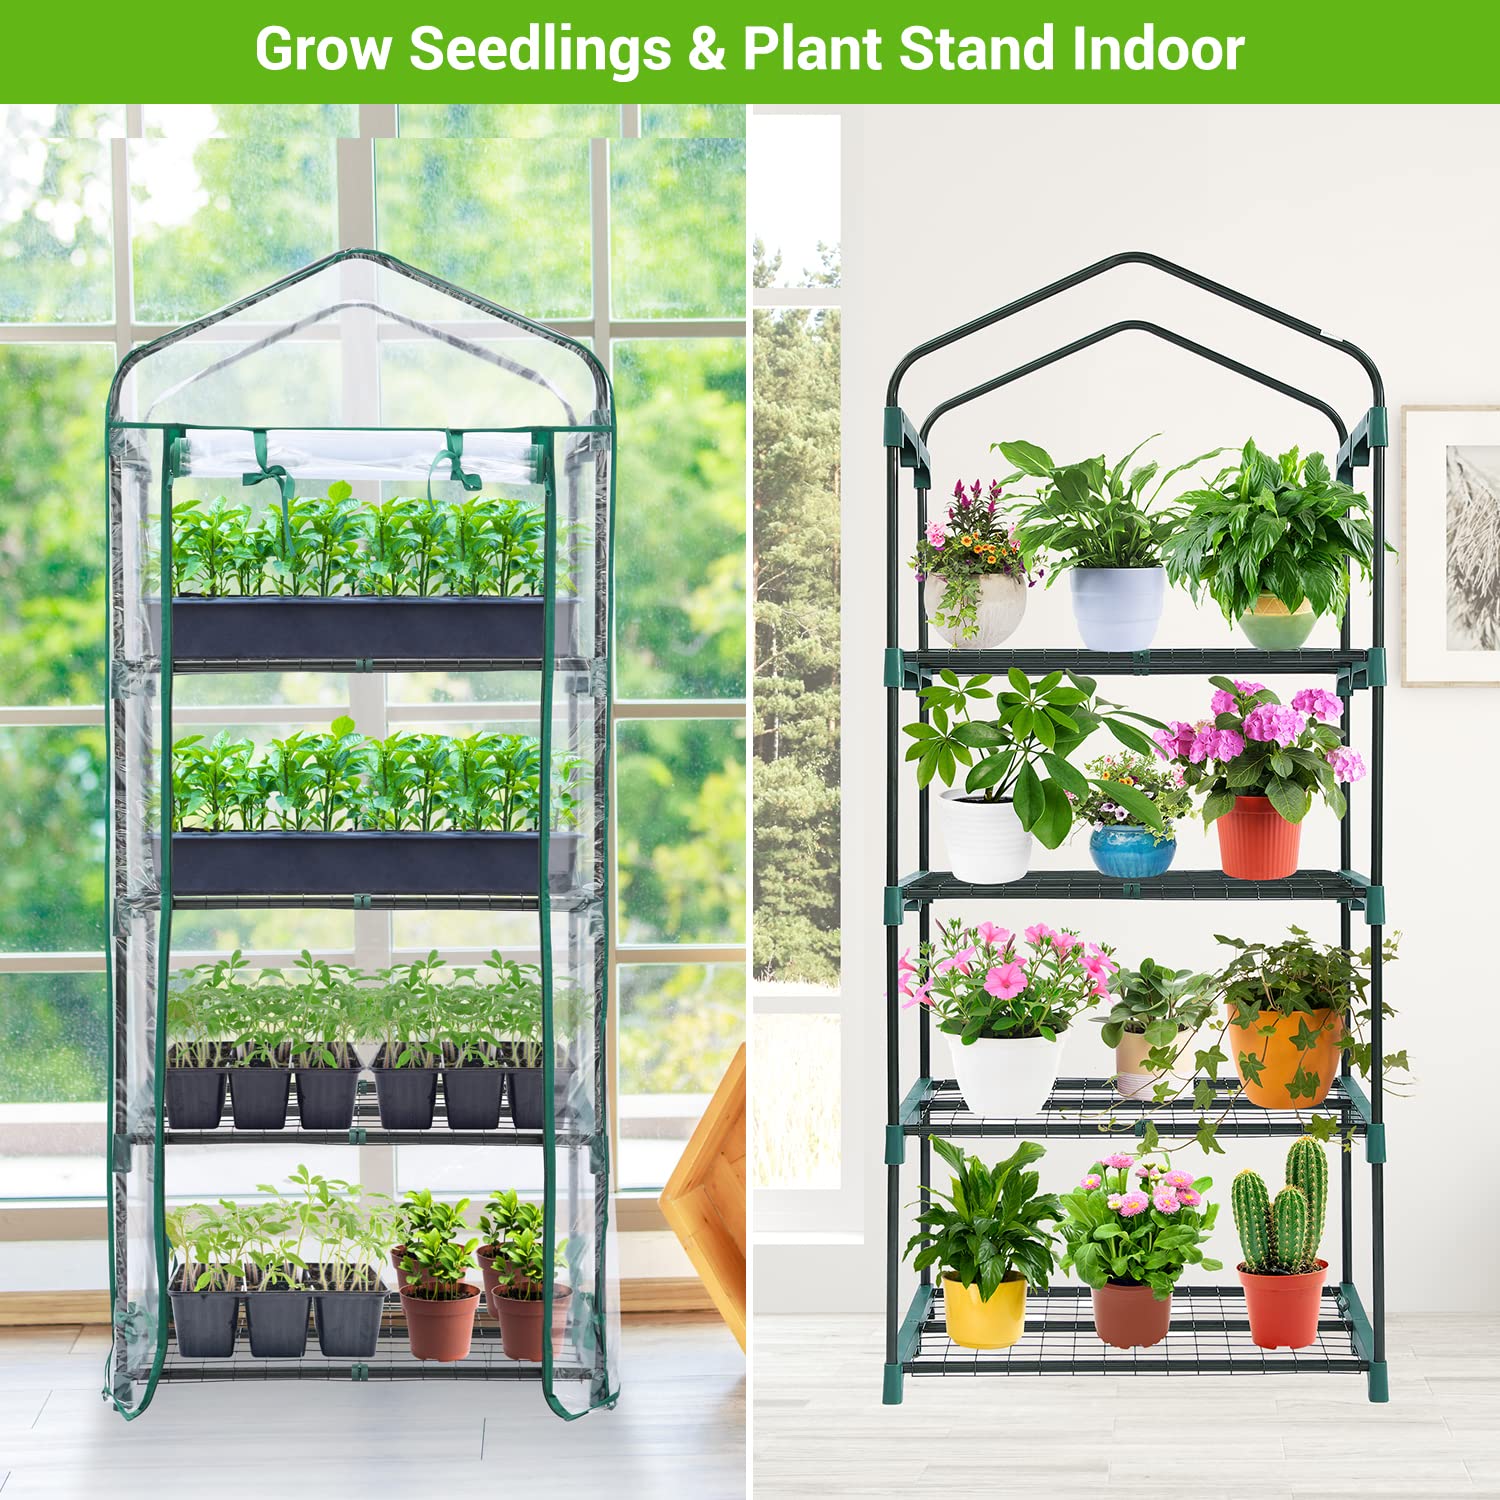 OHUHU Mini Greenhouse for Outdoors Indoor: Ohuhu Small Green House with 4 Tier Shelves, Portable Plastic Greenhouses with Heavy Duty T